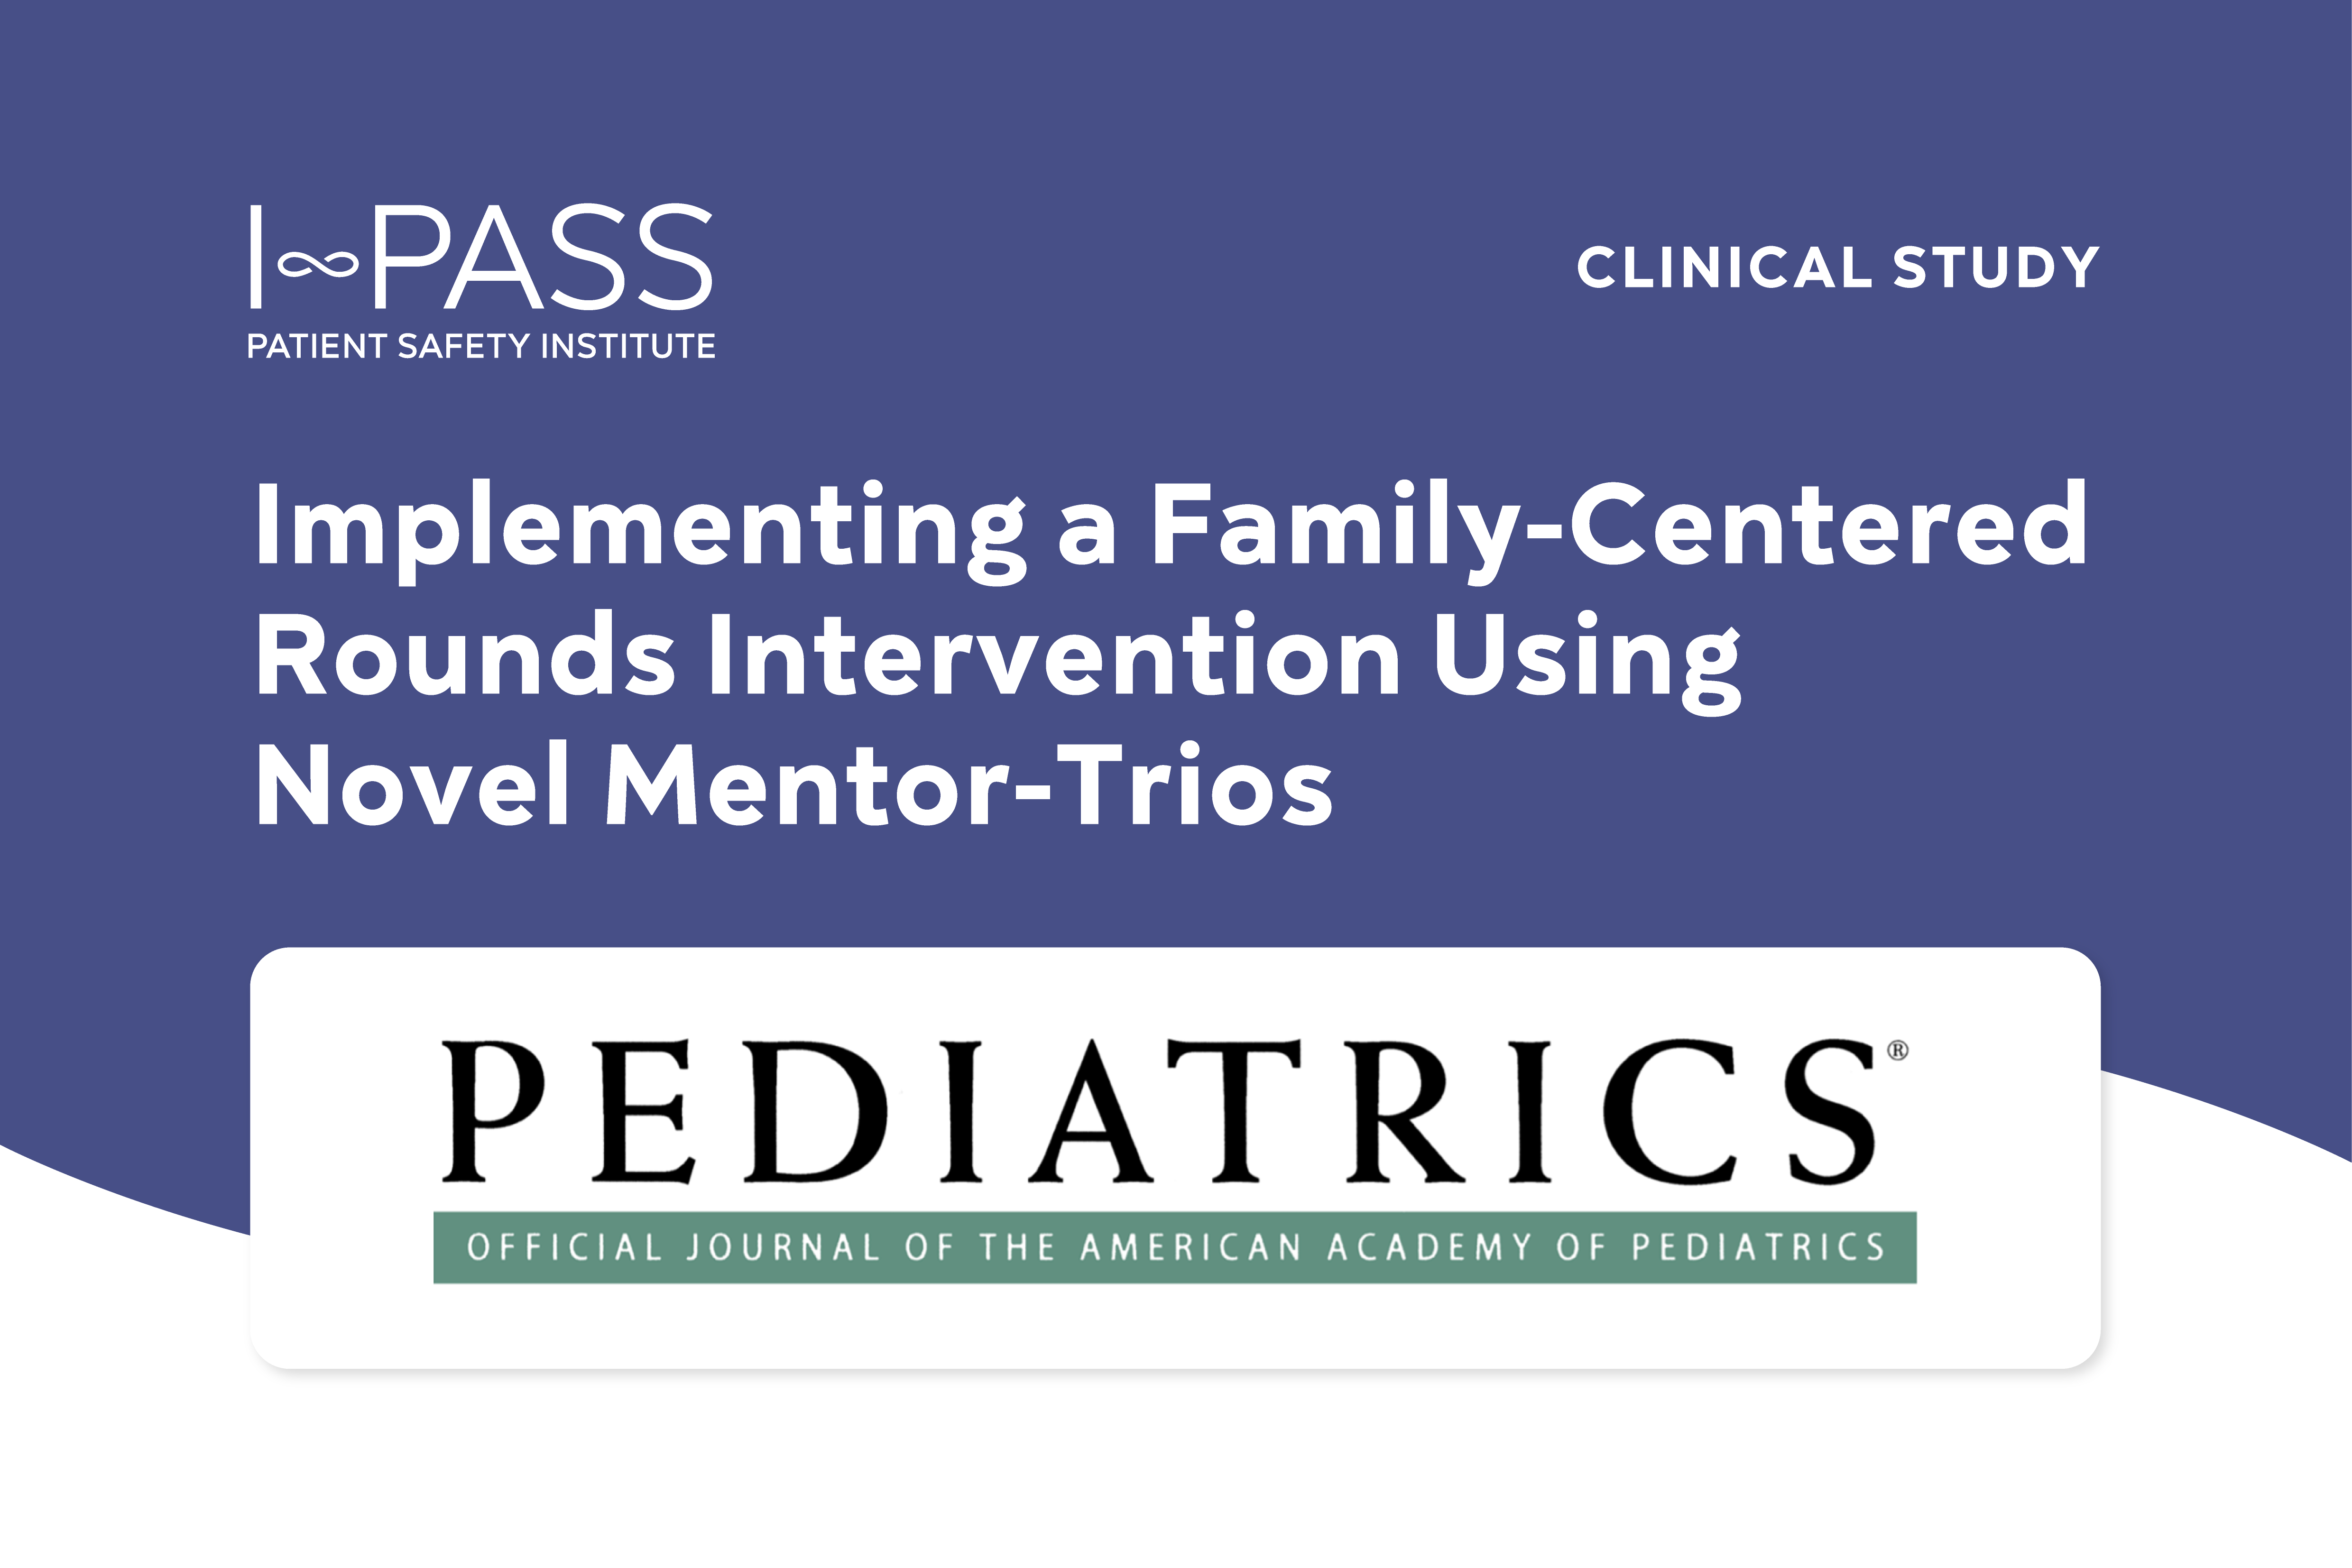 Implementing a Family-Centered Rounds Intervention Using Novel Mentor-Trios